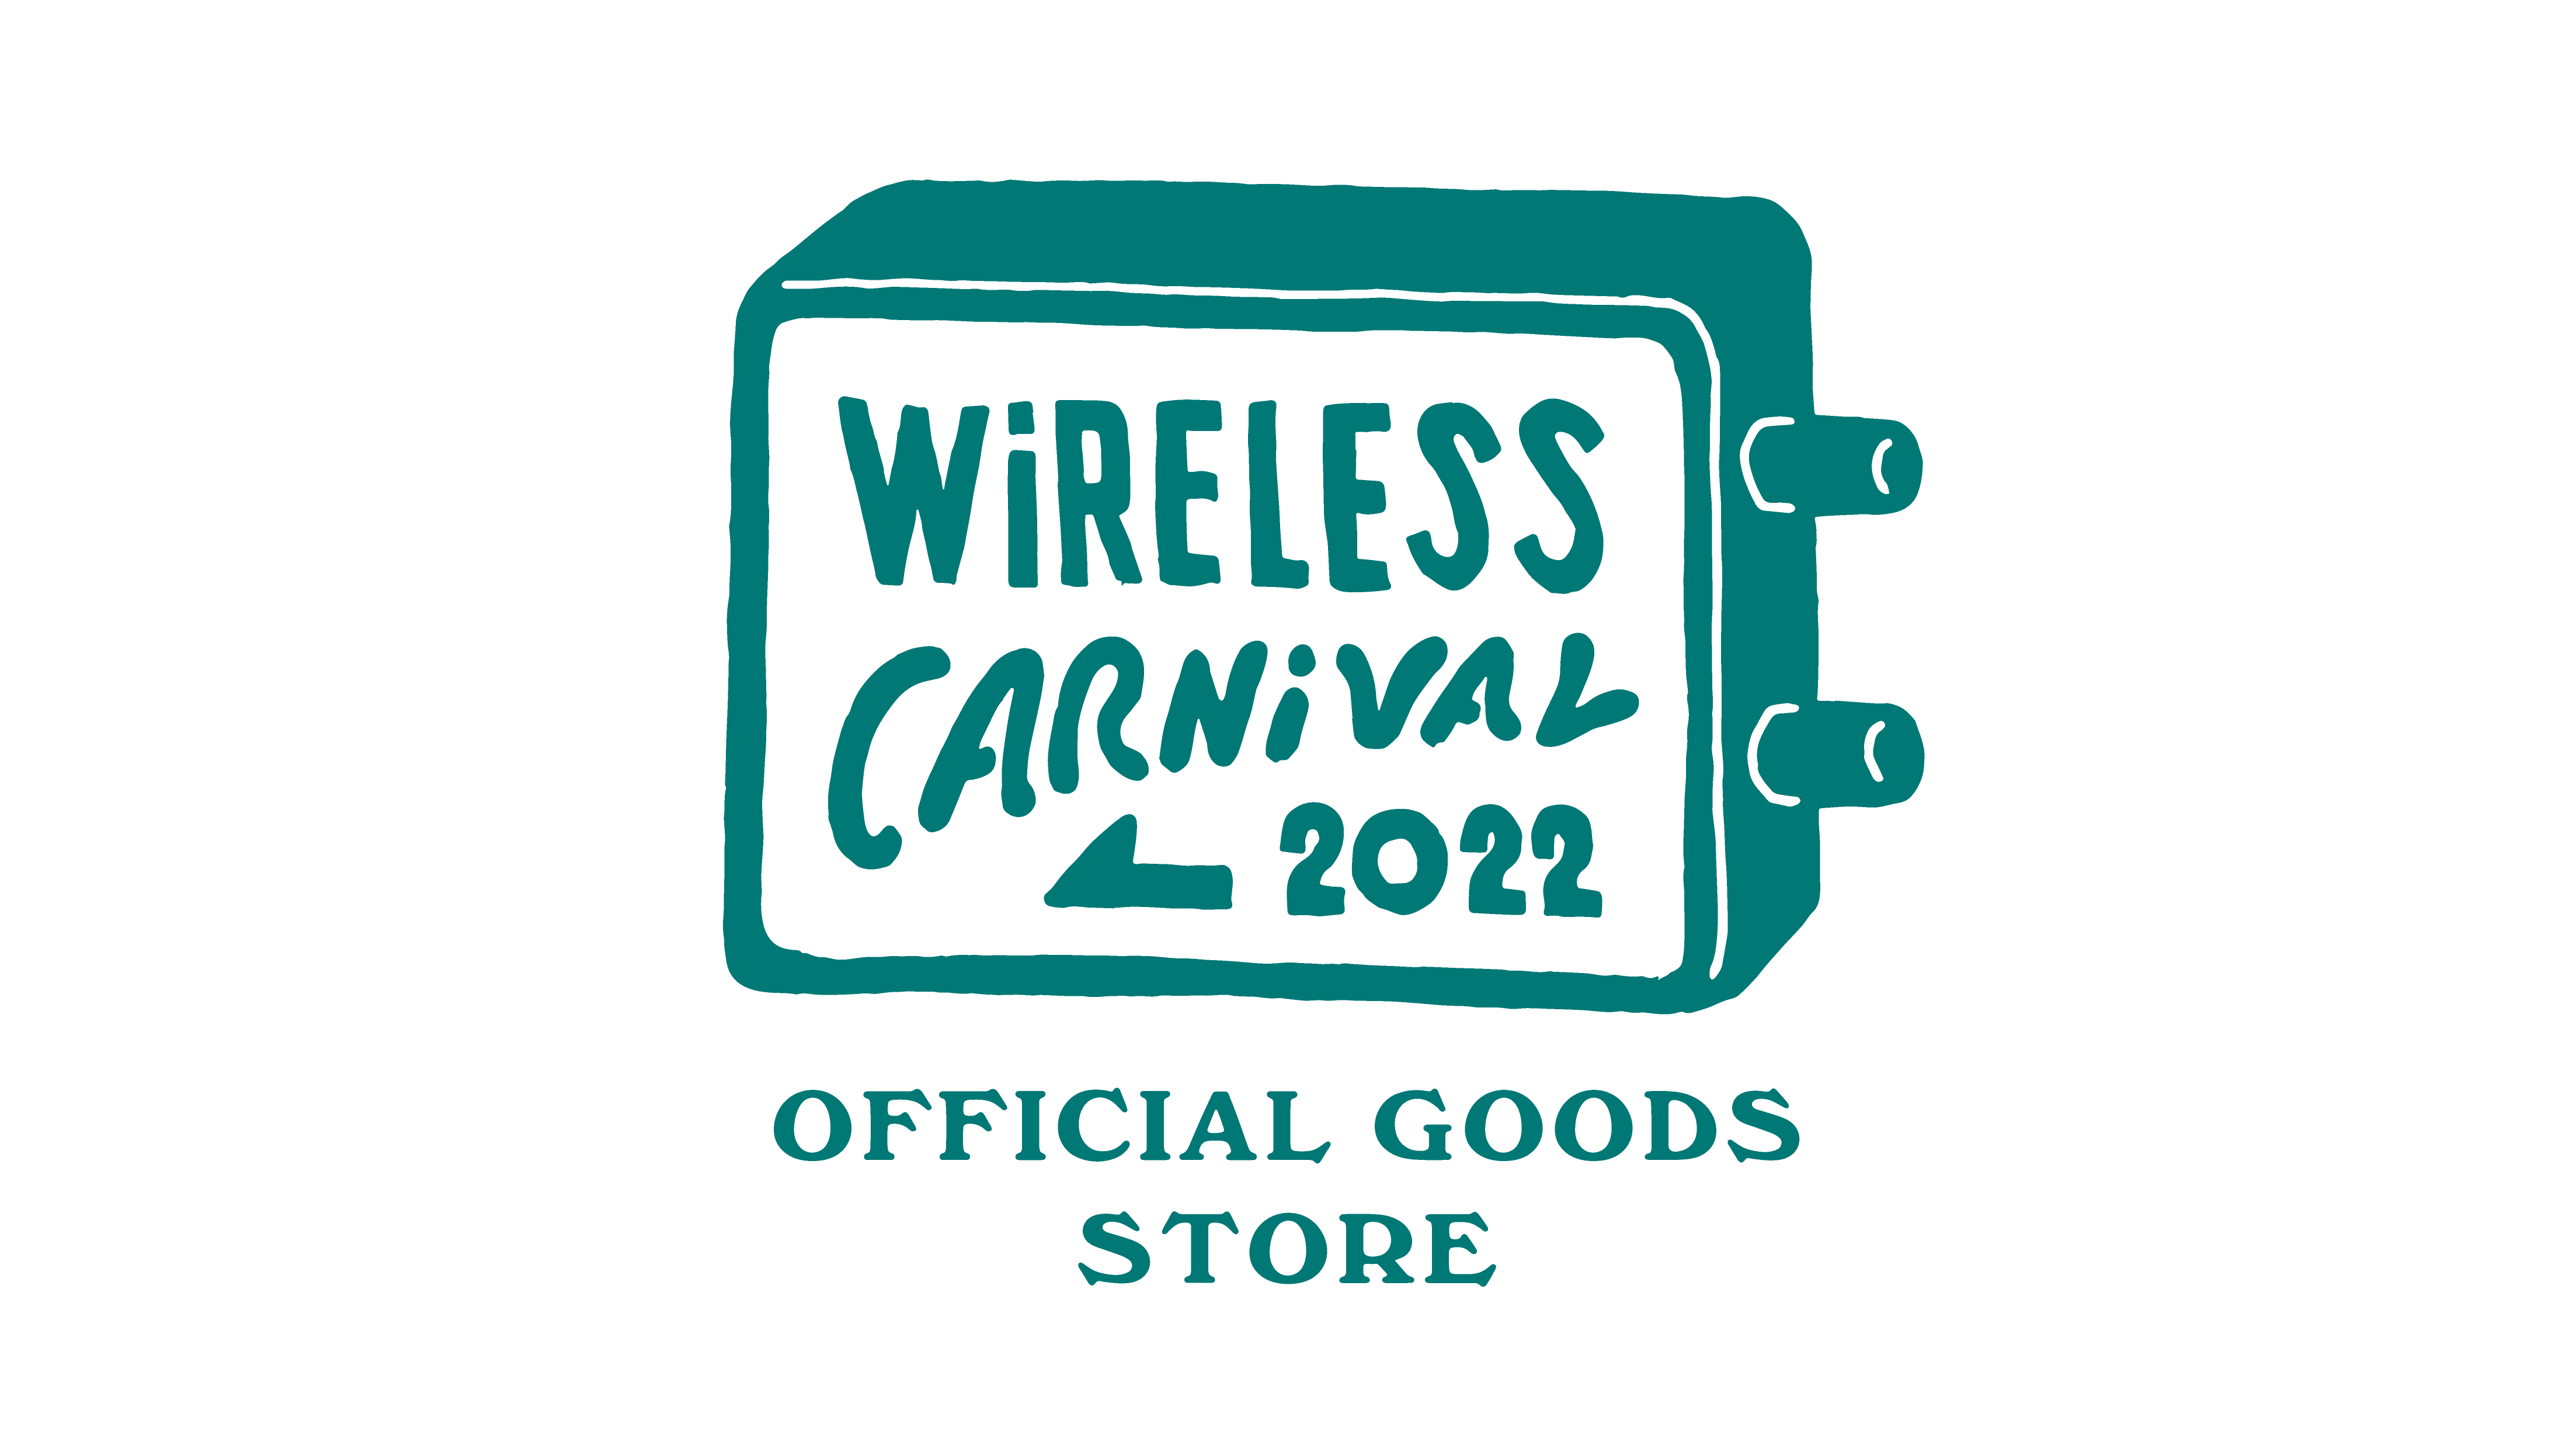 WiRELESS CARNiVAL 2022 OFFOCIAL GOODS STORE